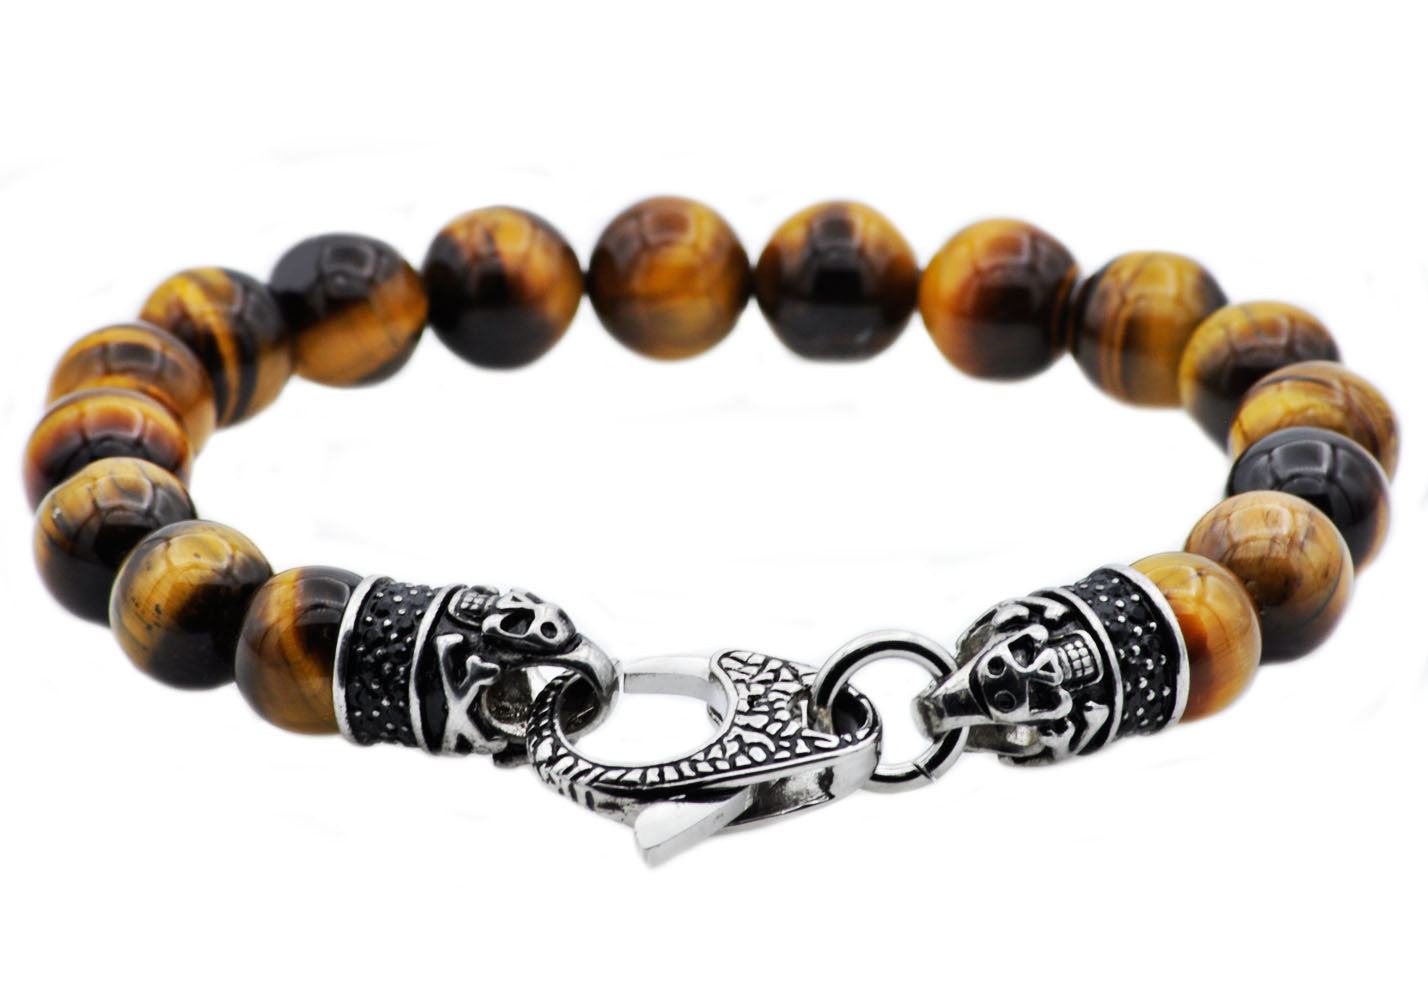 Luxury Tiger Eye Stone Bracelet For Men And Women Designer Party Black Bead  Strands With Cubic Zirconia B Beads In Silver And Gold Perfect Gift For  Lovers From Jmyy, $5.86